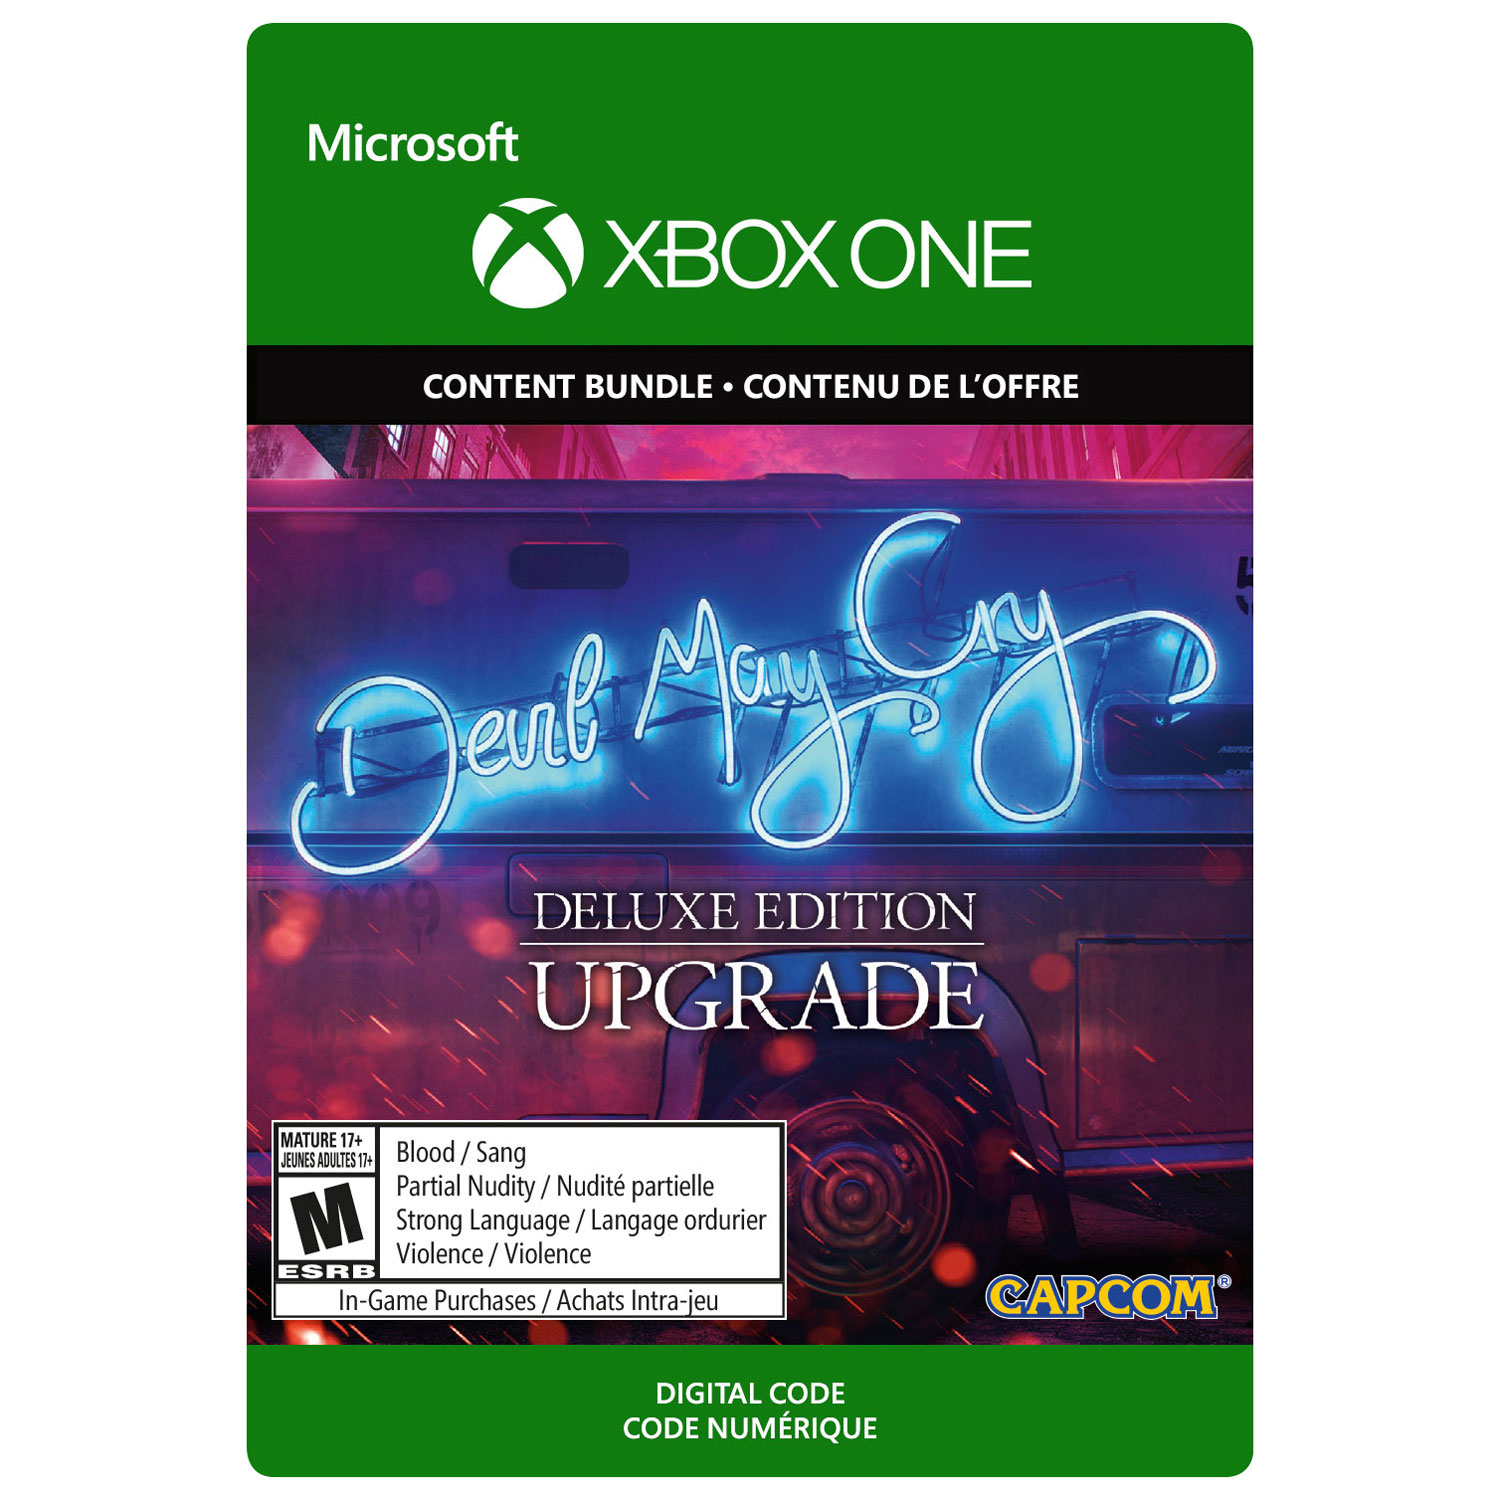 Devil May Cry 5 Deluxe Edition Upgrade (Xbox One) - Digital Download